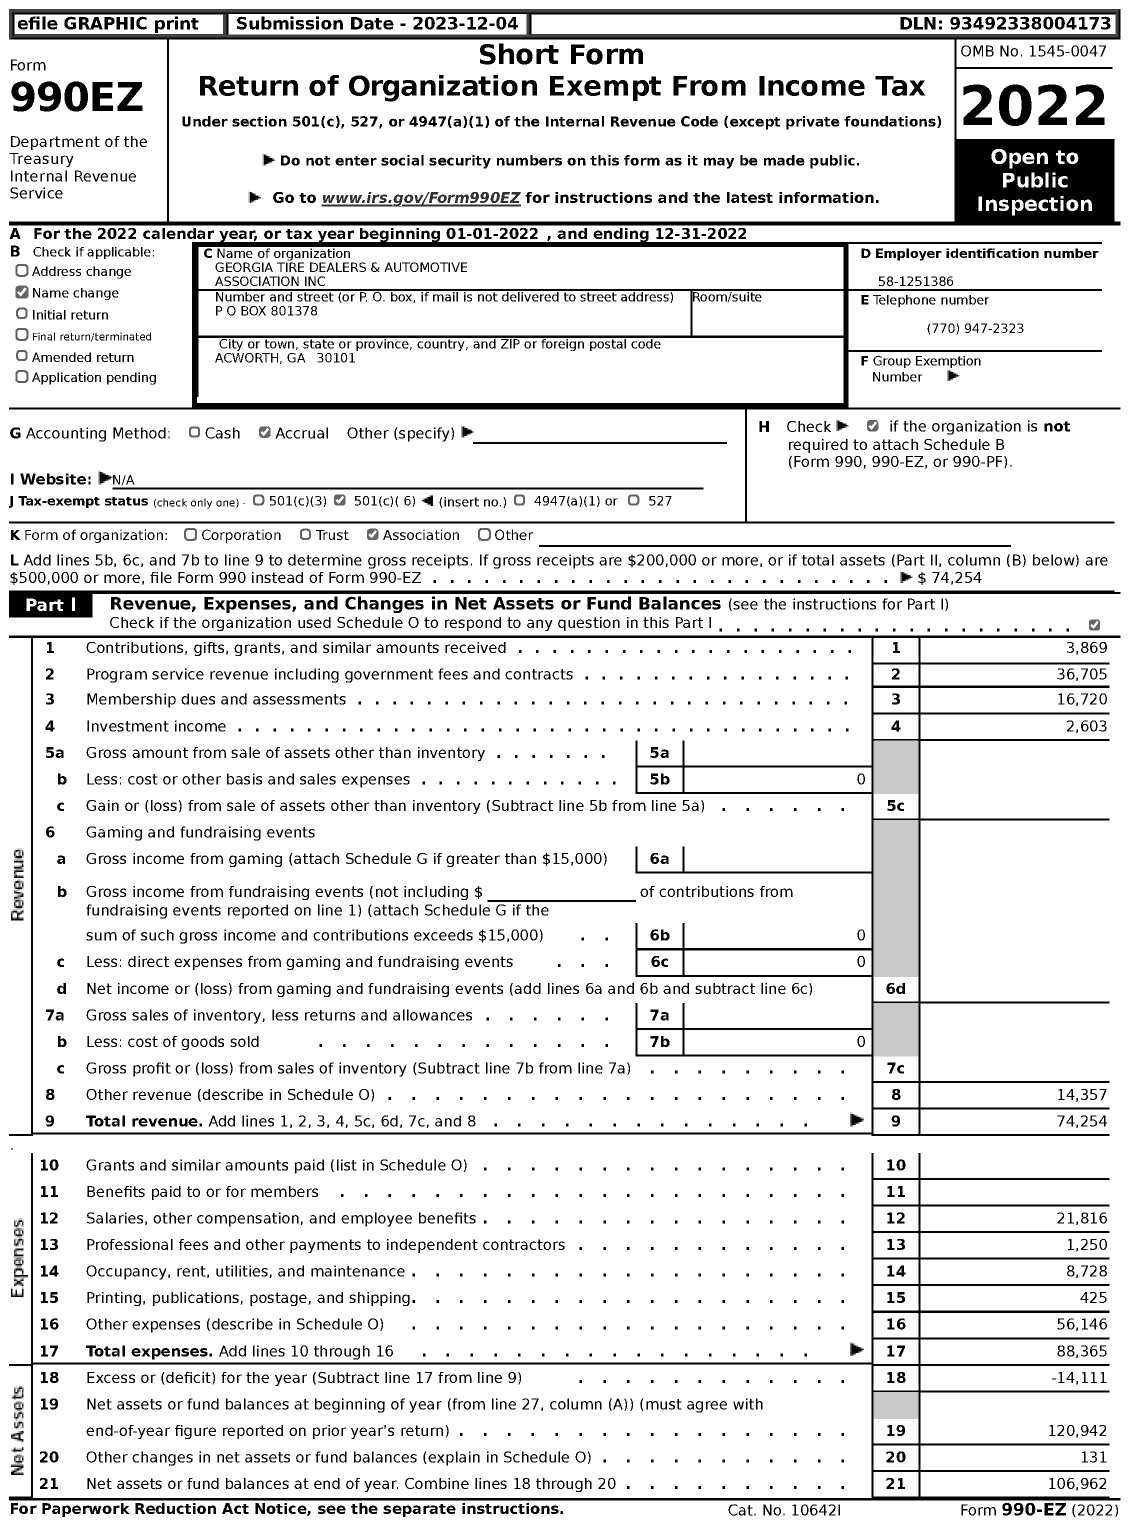 Image of first page of 2022 Form 990EZ for Georgia Tire Dealers and Automotive Association